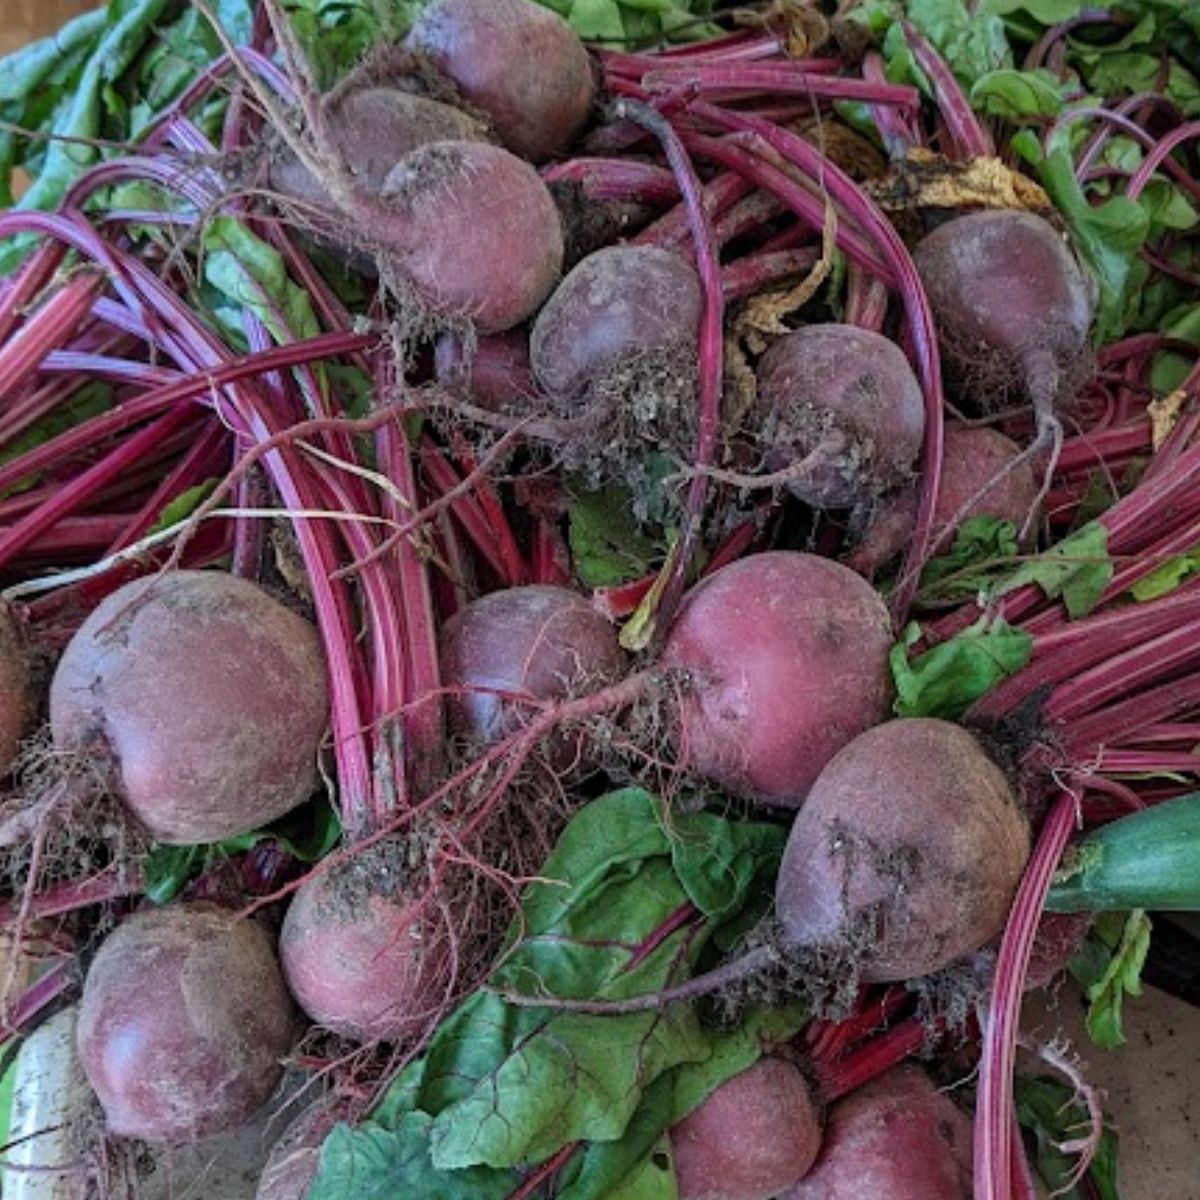 Freshly picked beets.